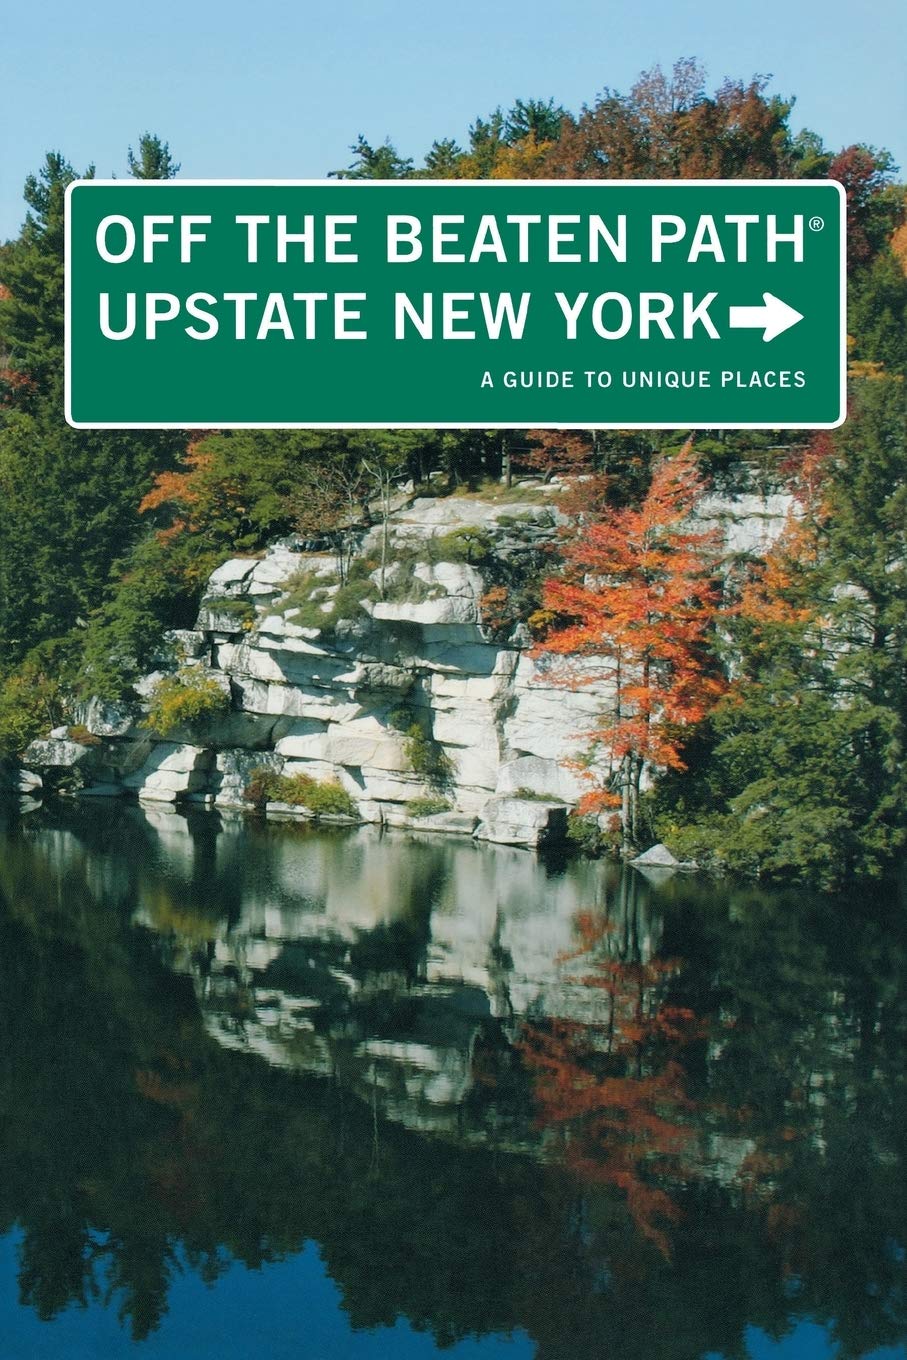 Upstate New York Off the Beaten Path®: A Guide To Unique Places (Off the Beaten Path Series)